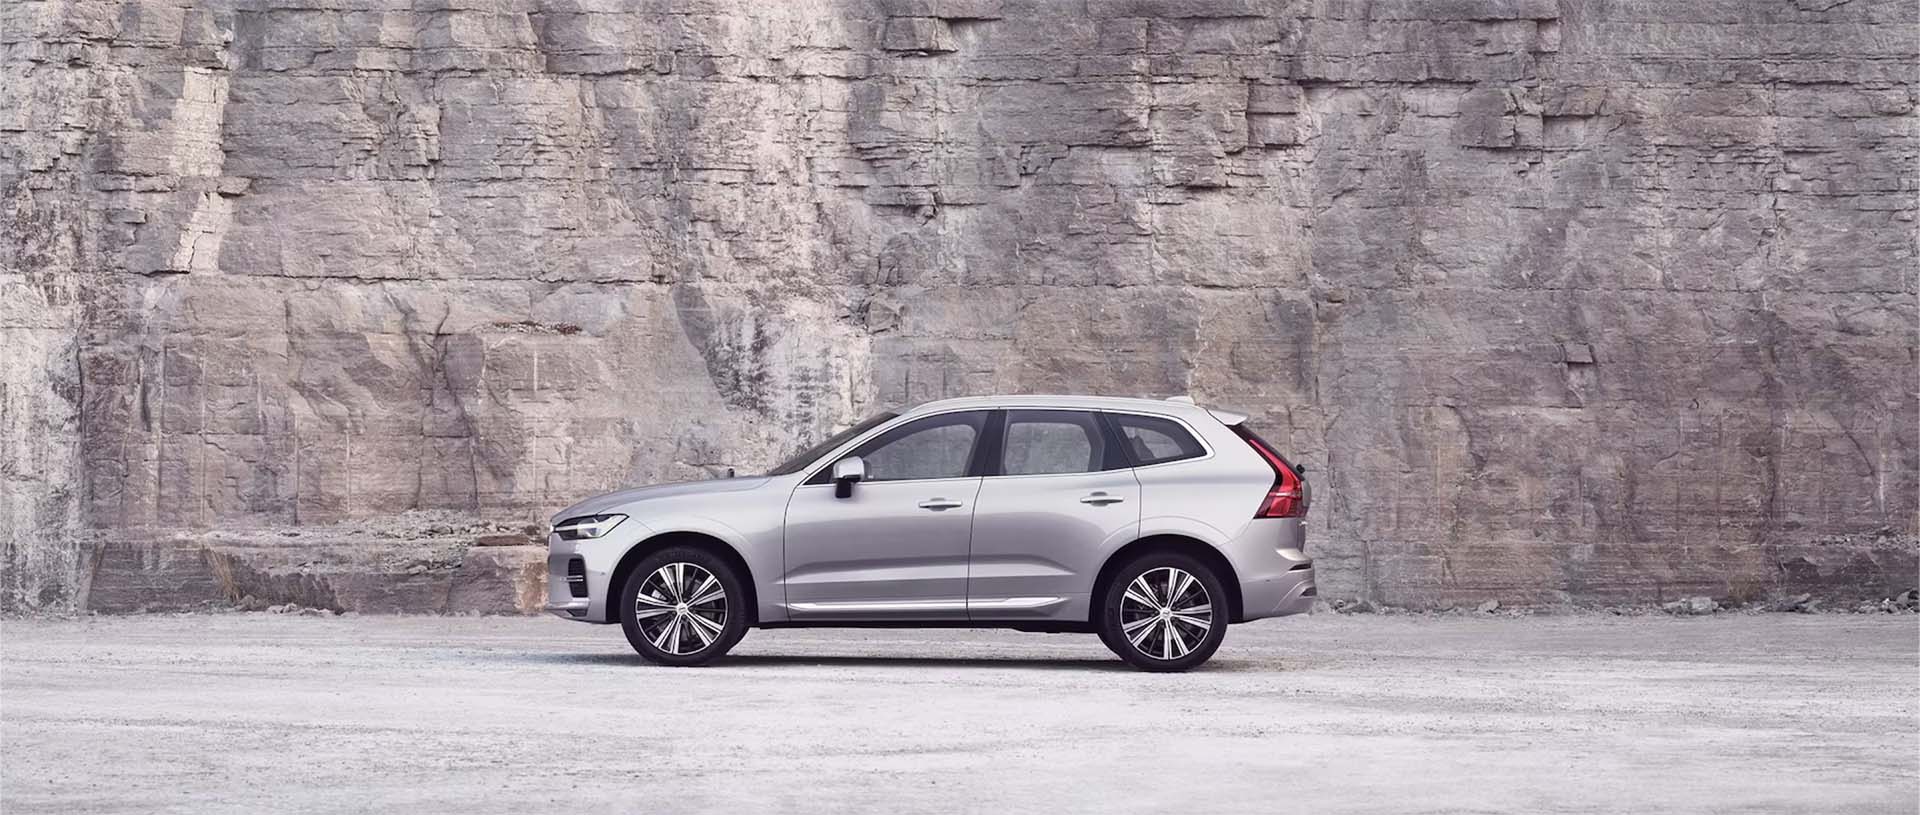 2023 Volvo XC60 MPG & Fuel Economy: What To Know Before You Buy